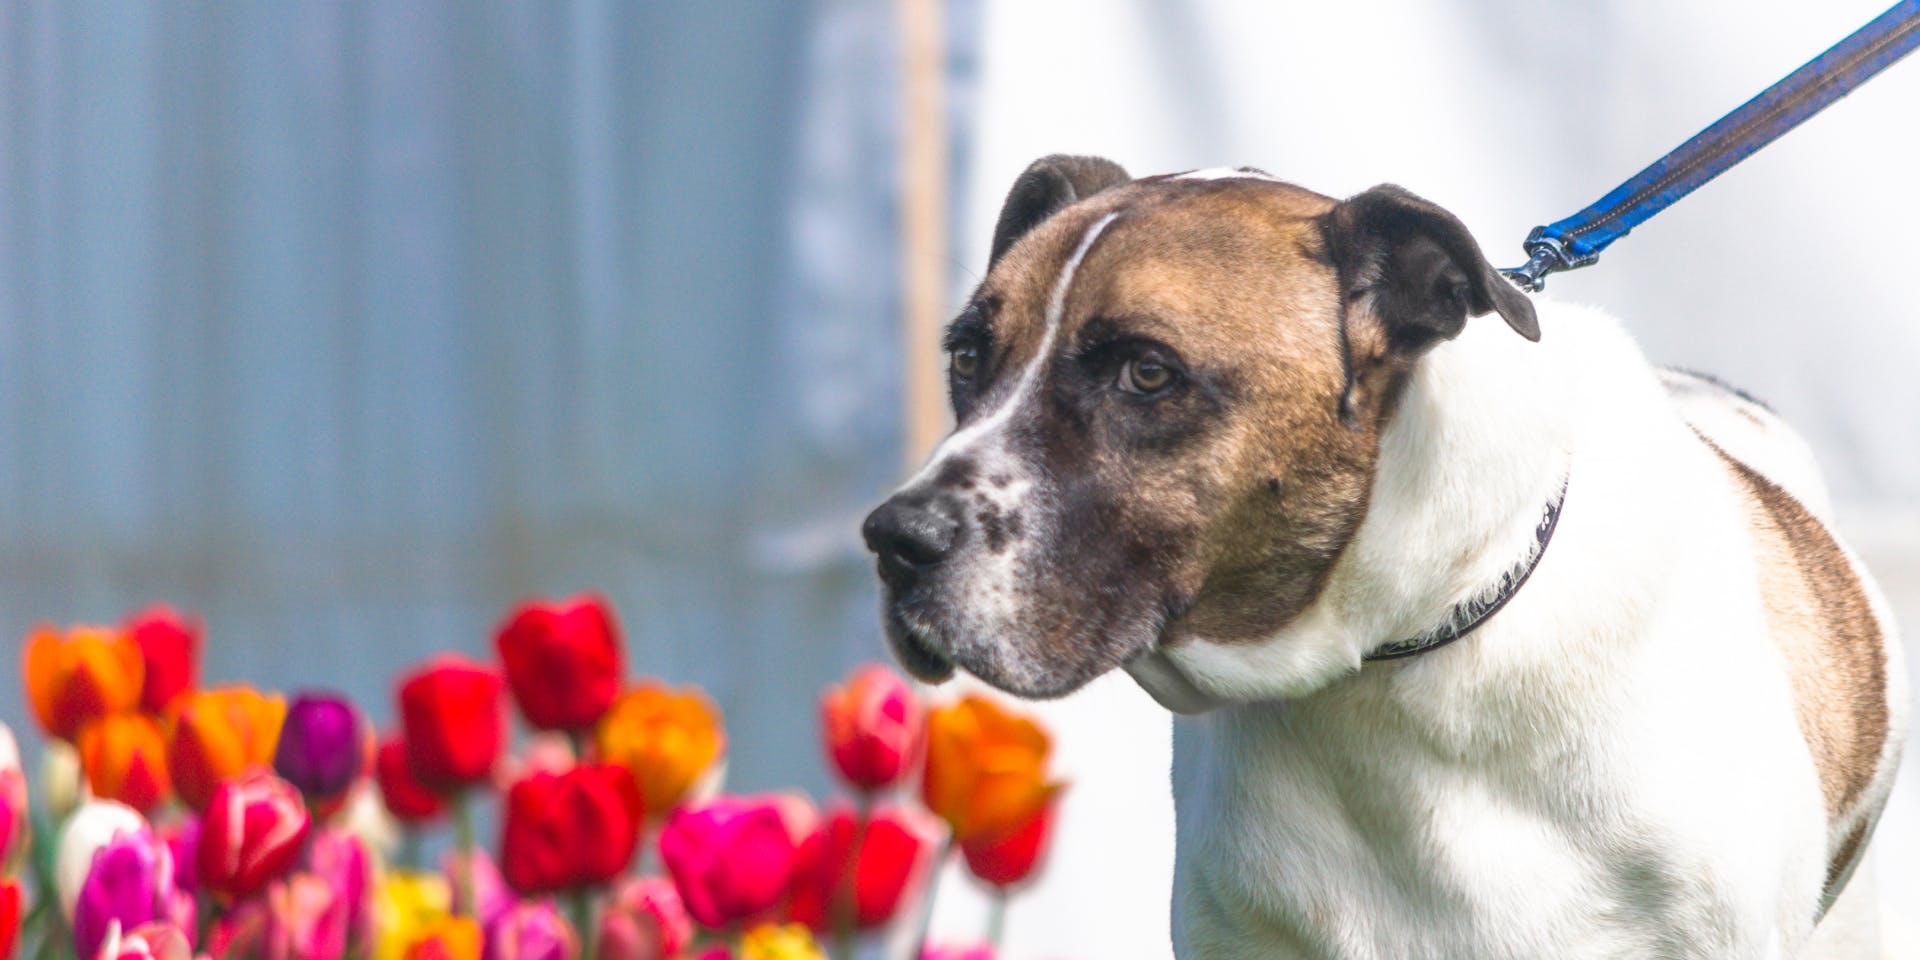 A dog out for a walk next to some tulips.